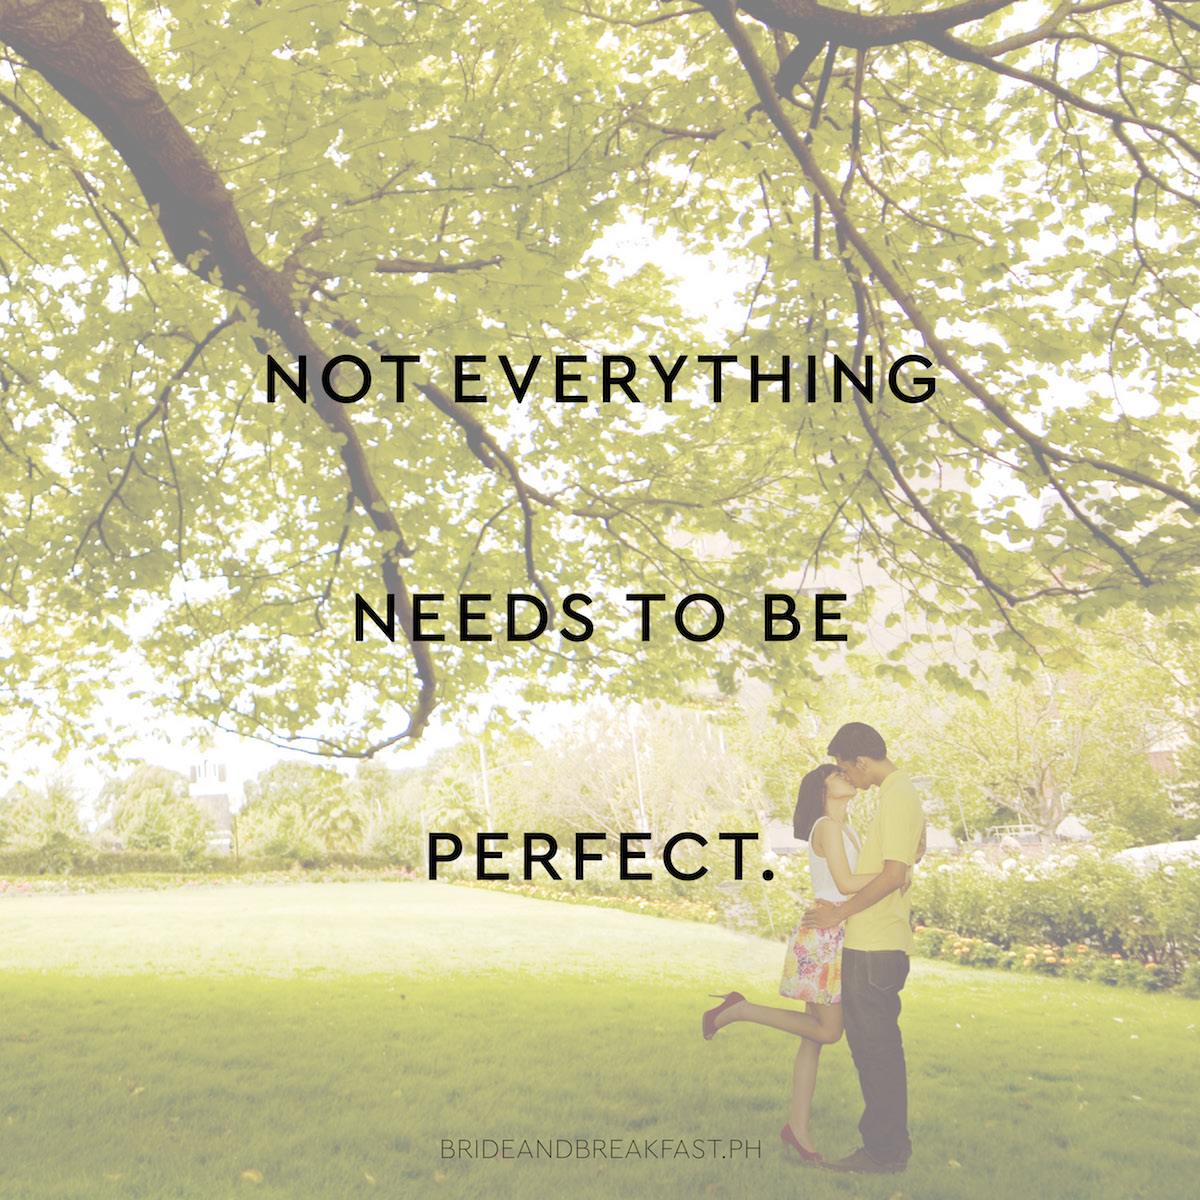 Not everything needs to be perfect.